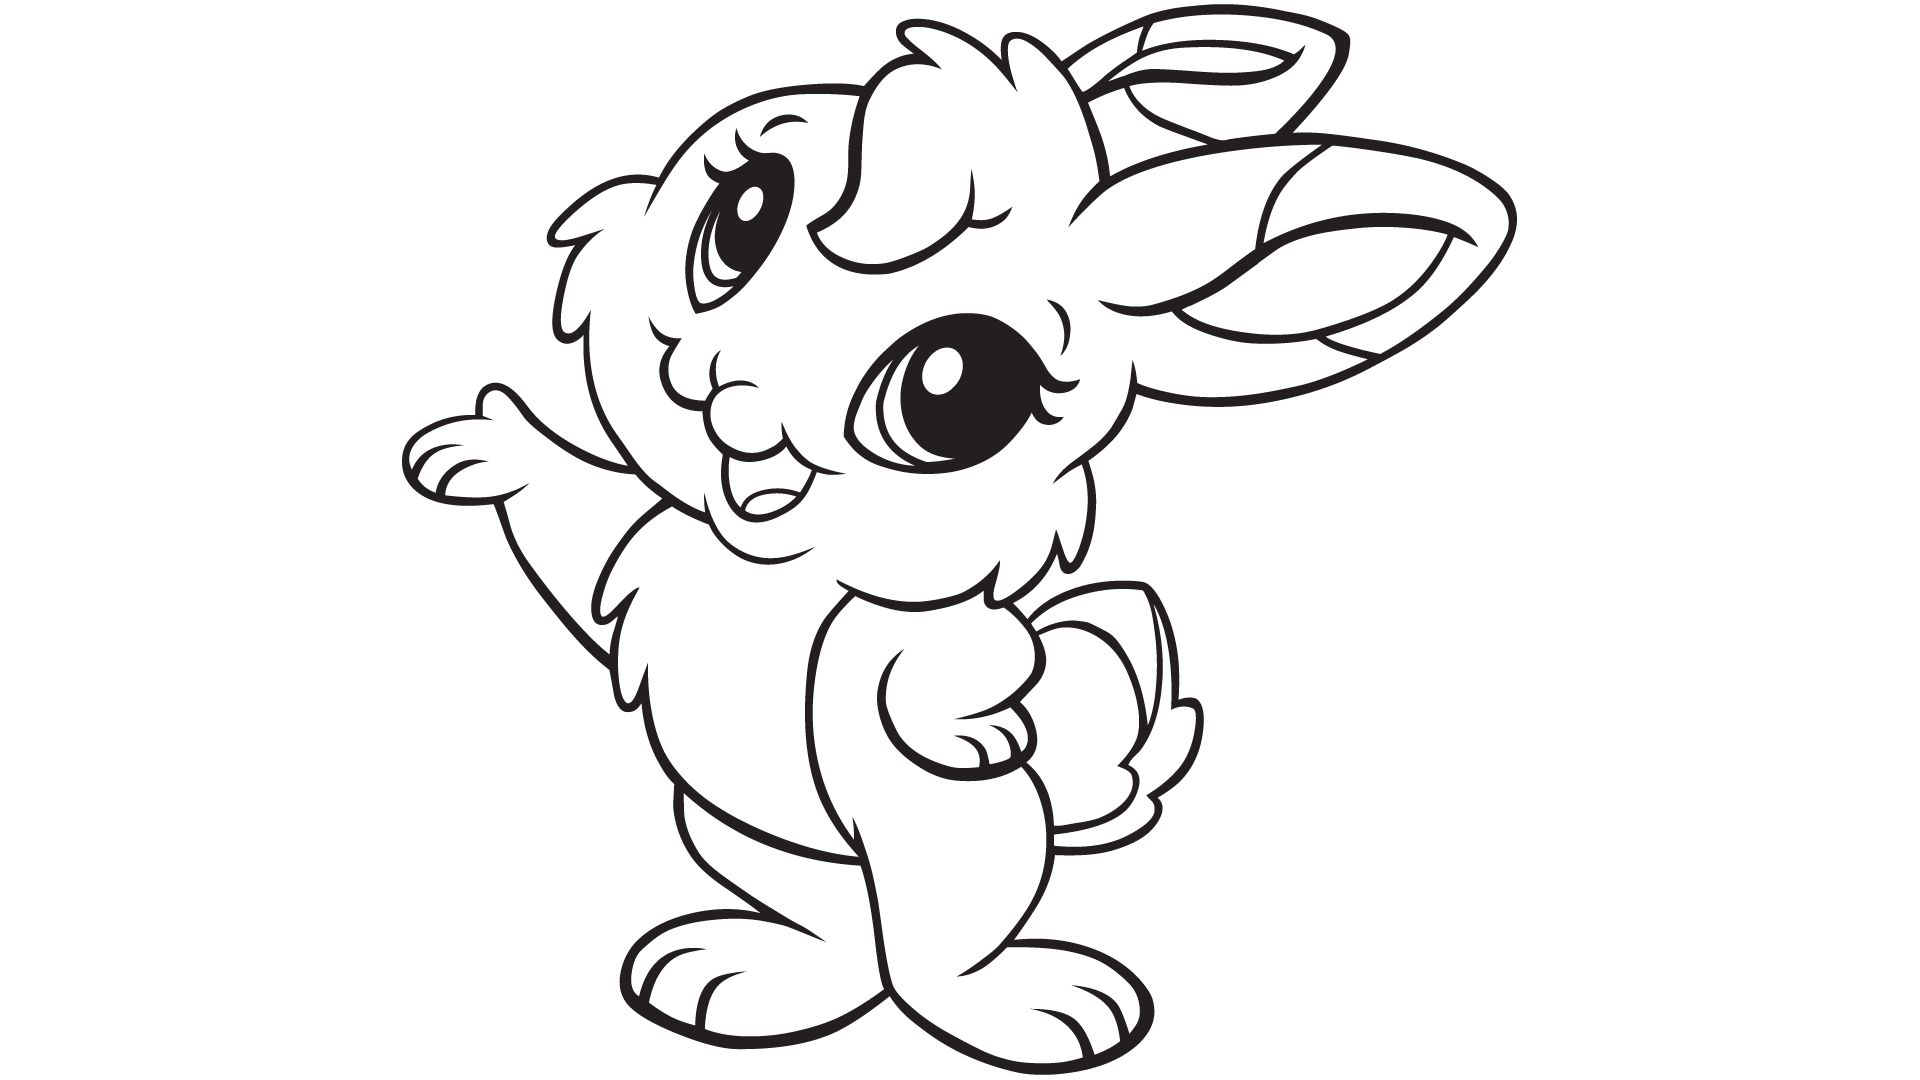 Bunny Coloring Pages Free - Coloring Page